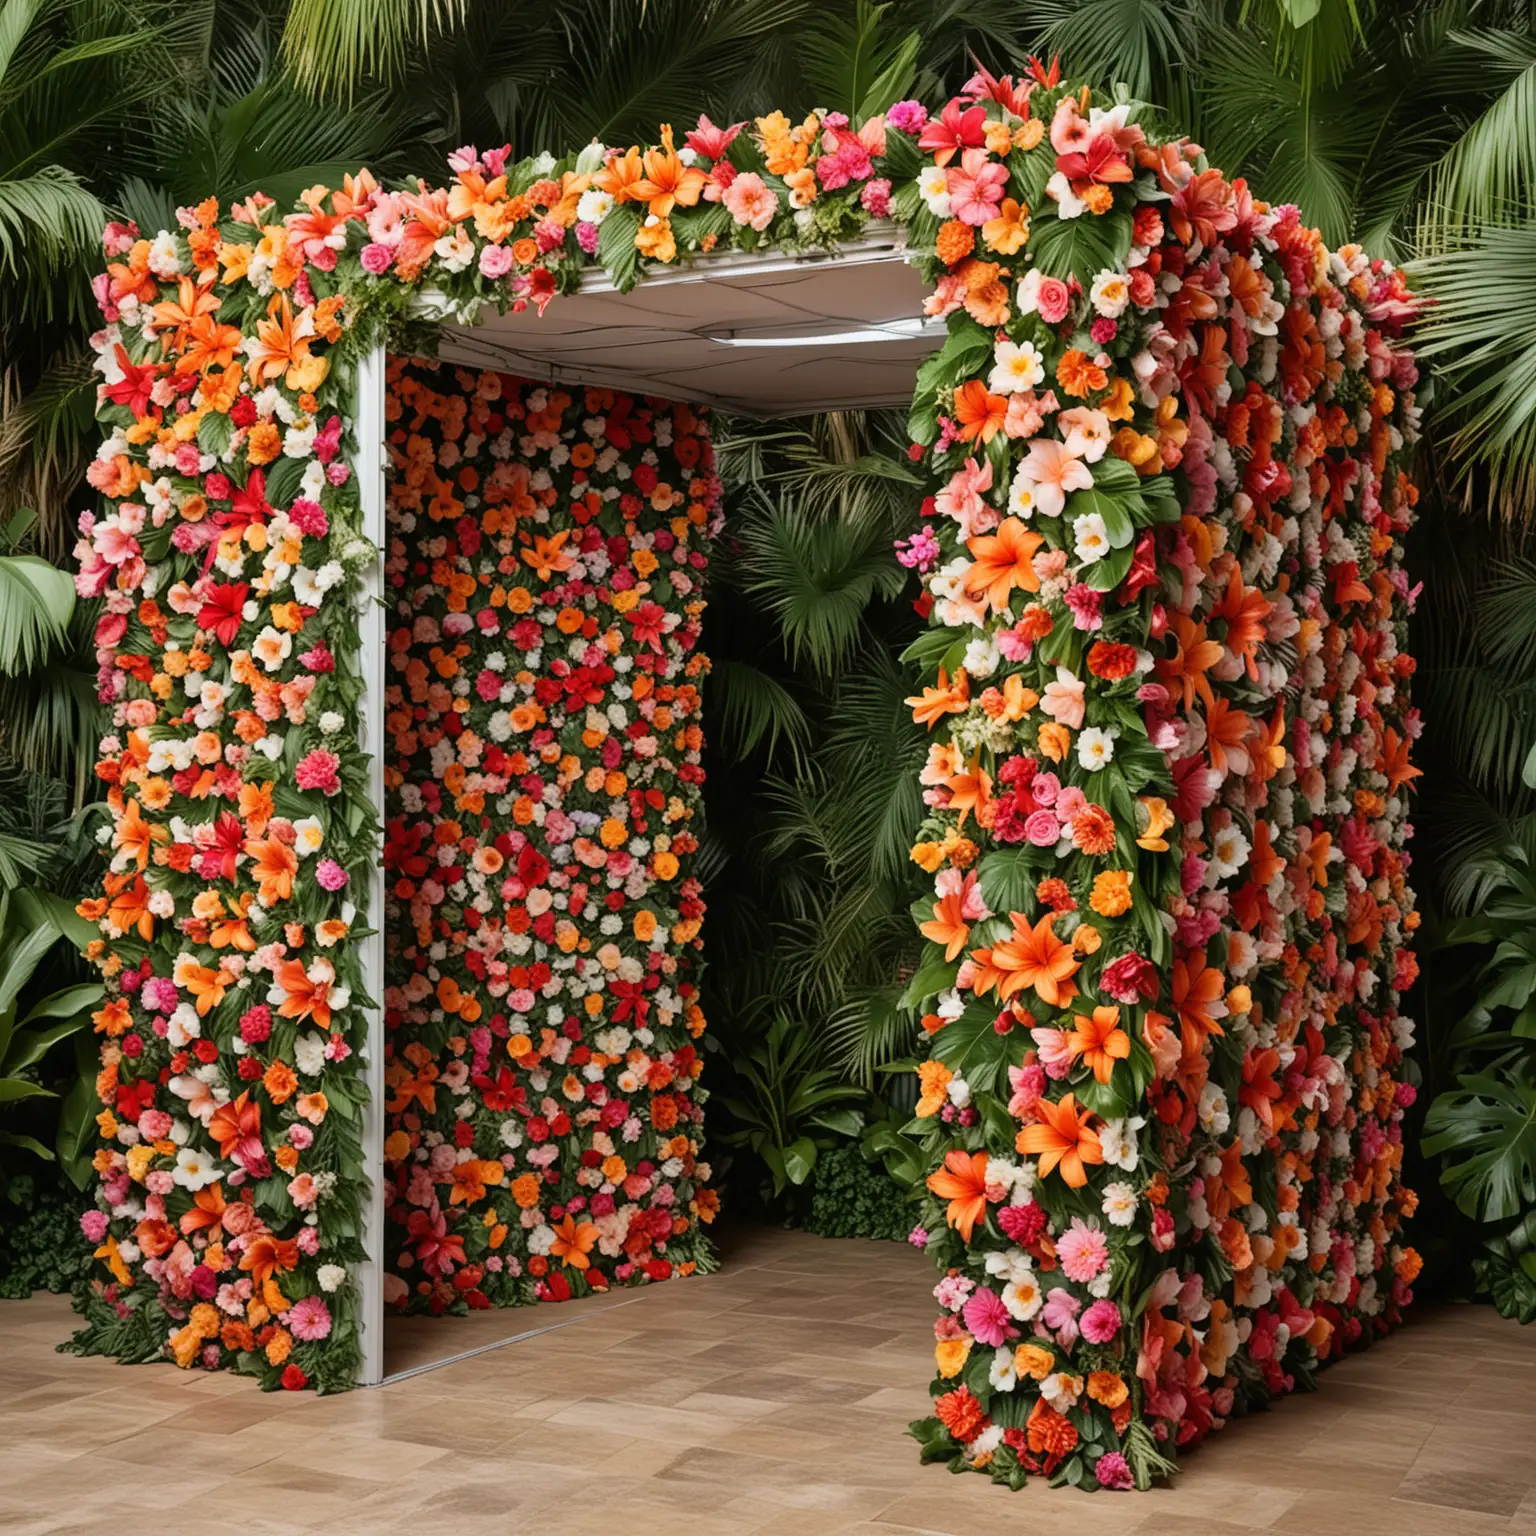 Cubed photobooth covered in tropical flowers everywhere with no doors or windows